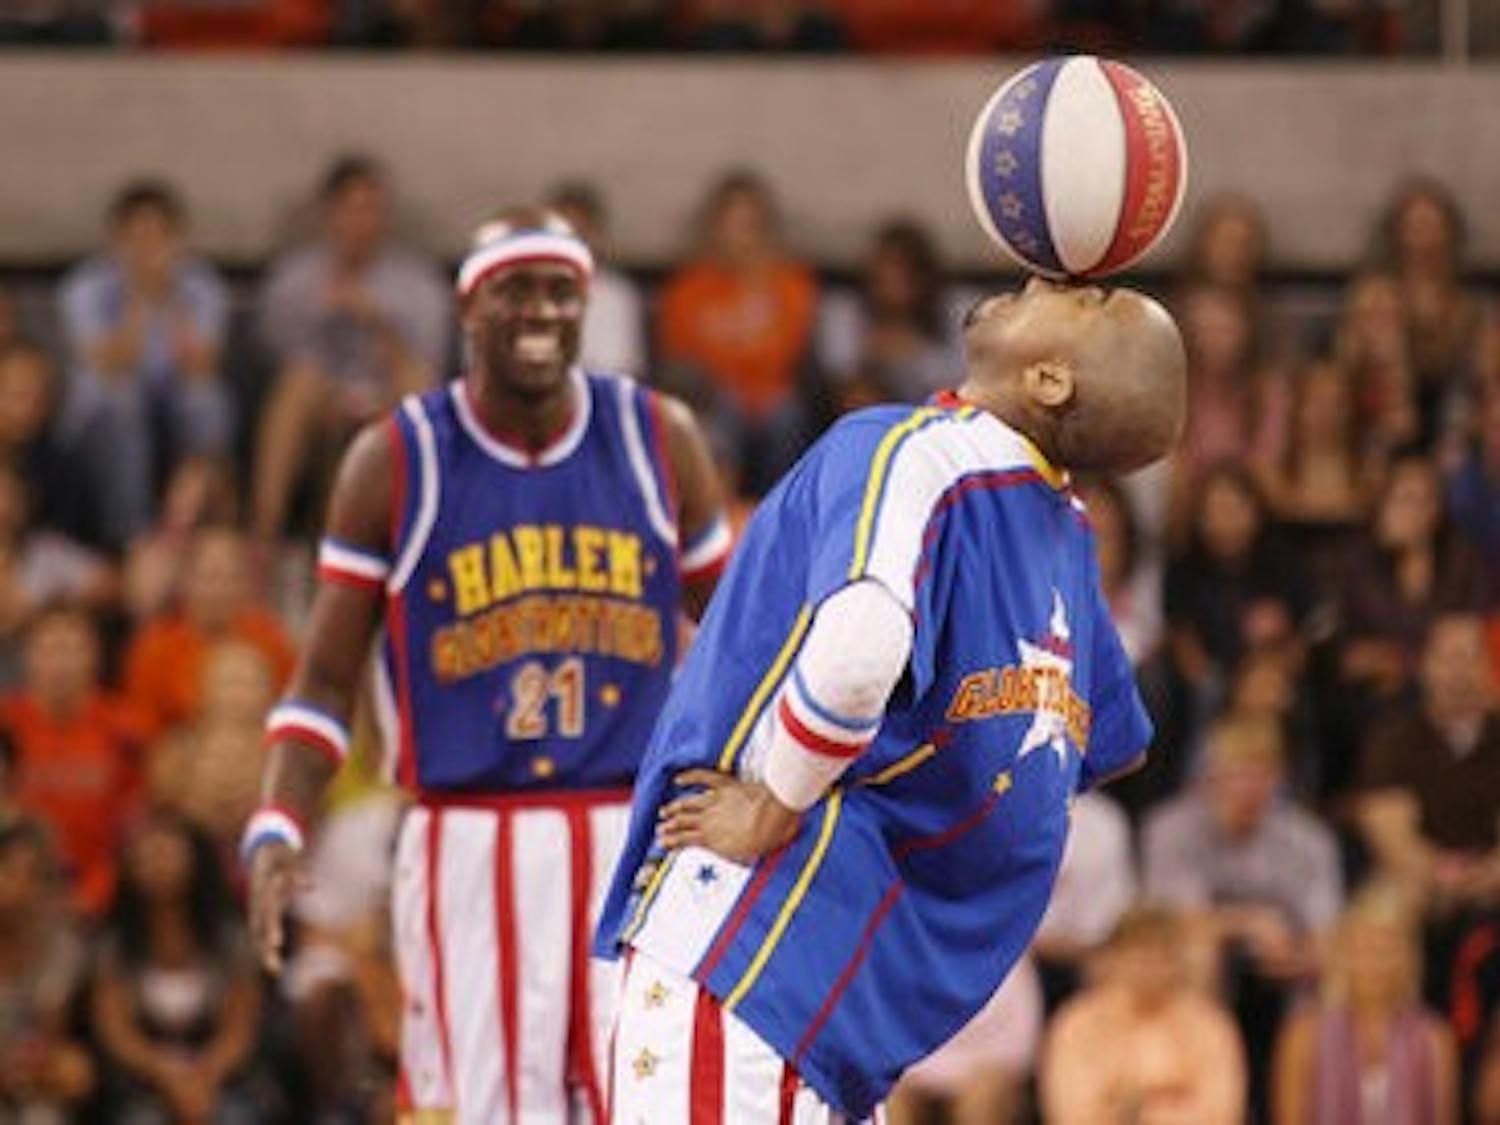 Harlem Globetrotter Scooter Christensen balances a ball on his nose at the opening of the Auburn Arena. (Photos by Emily Adams / Photo Editor)